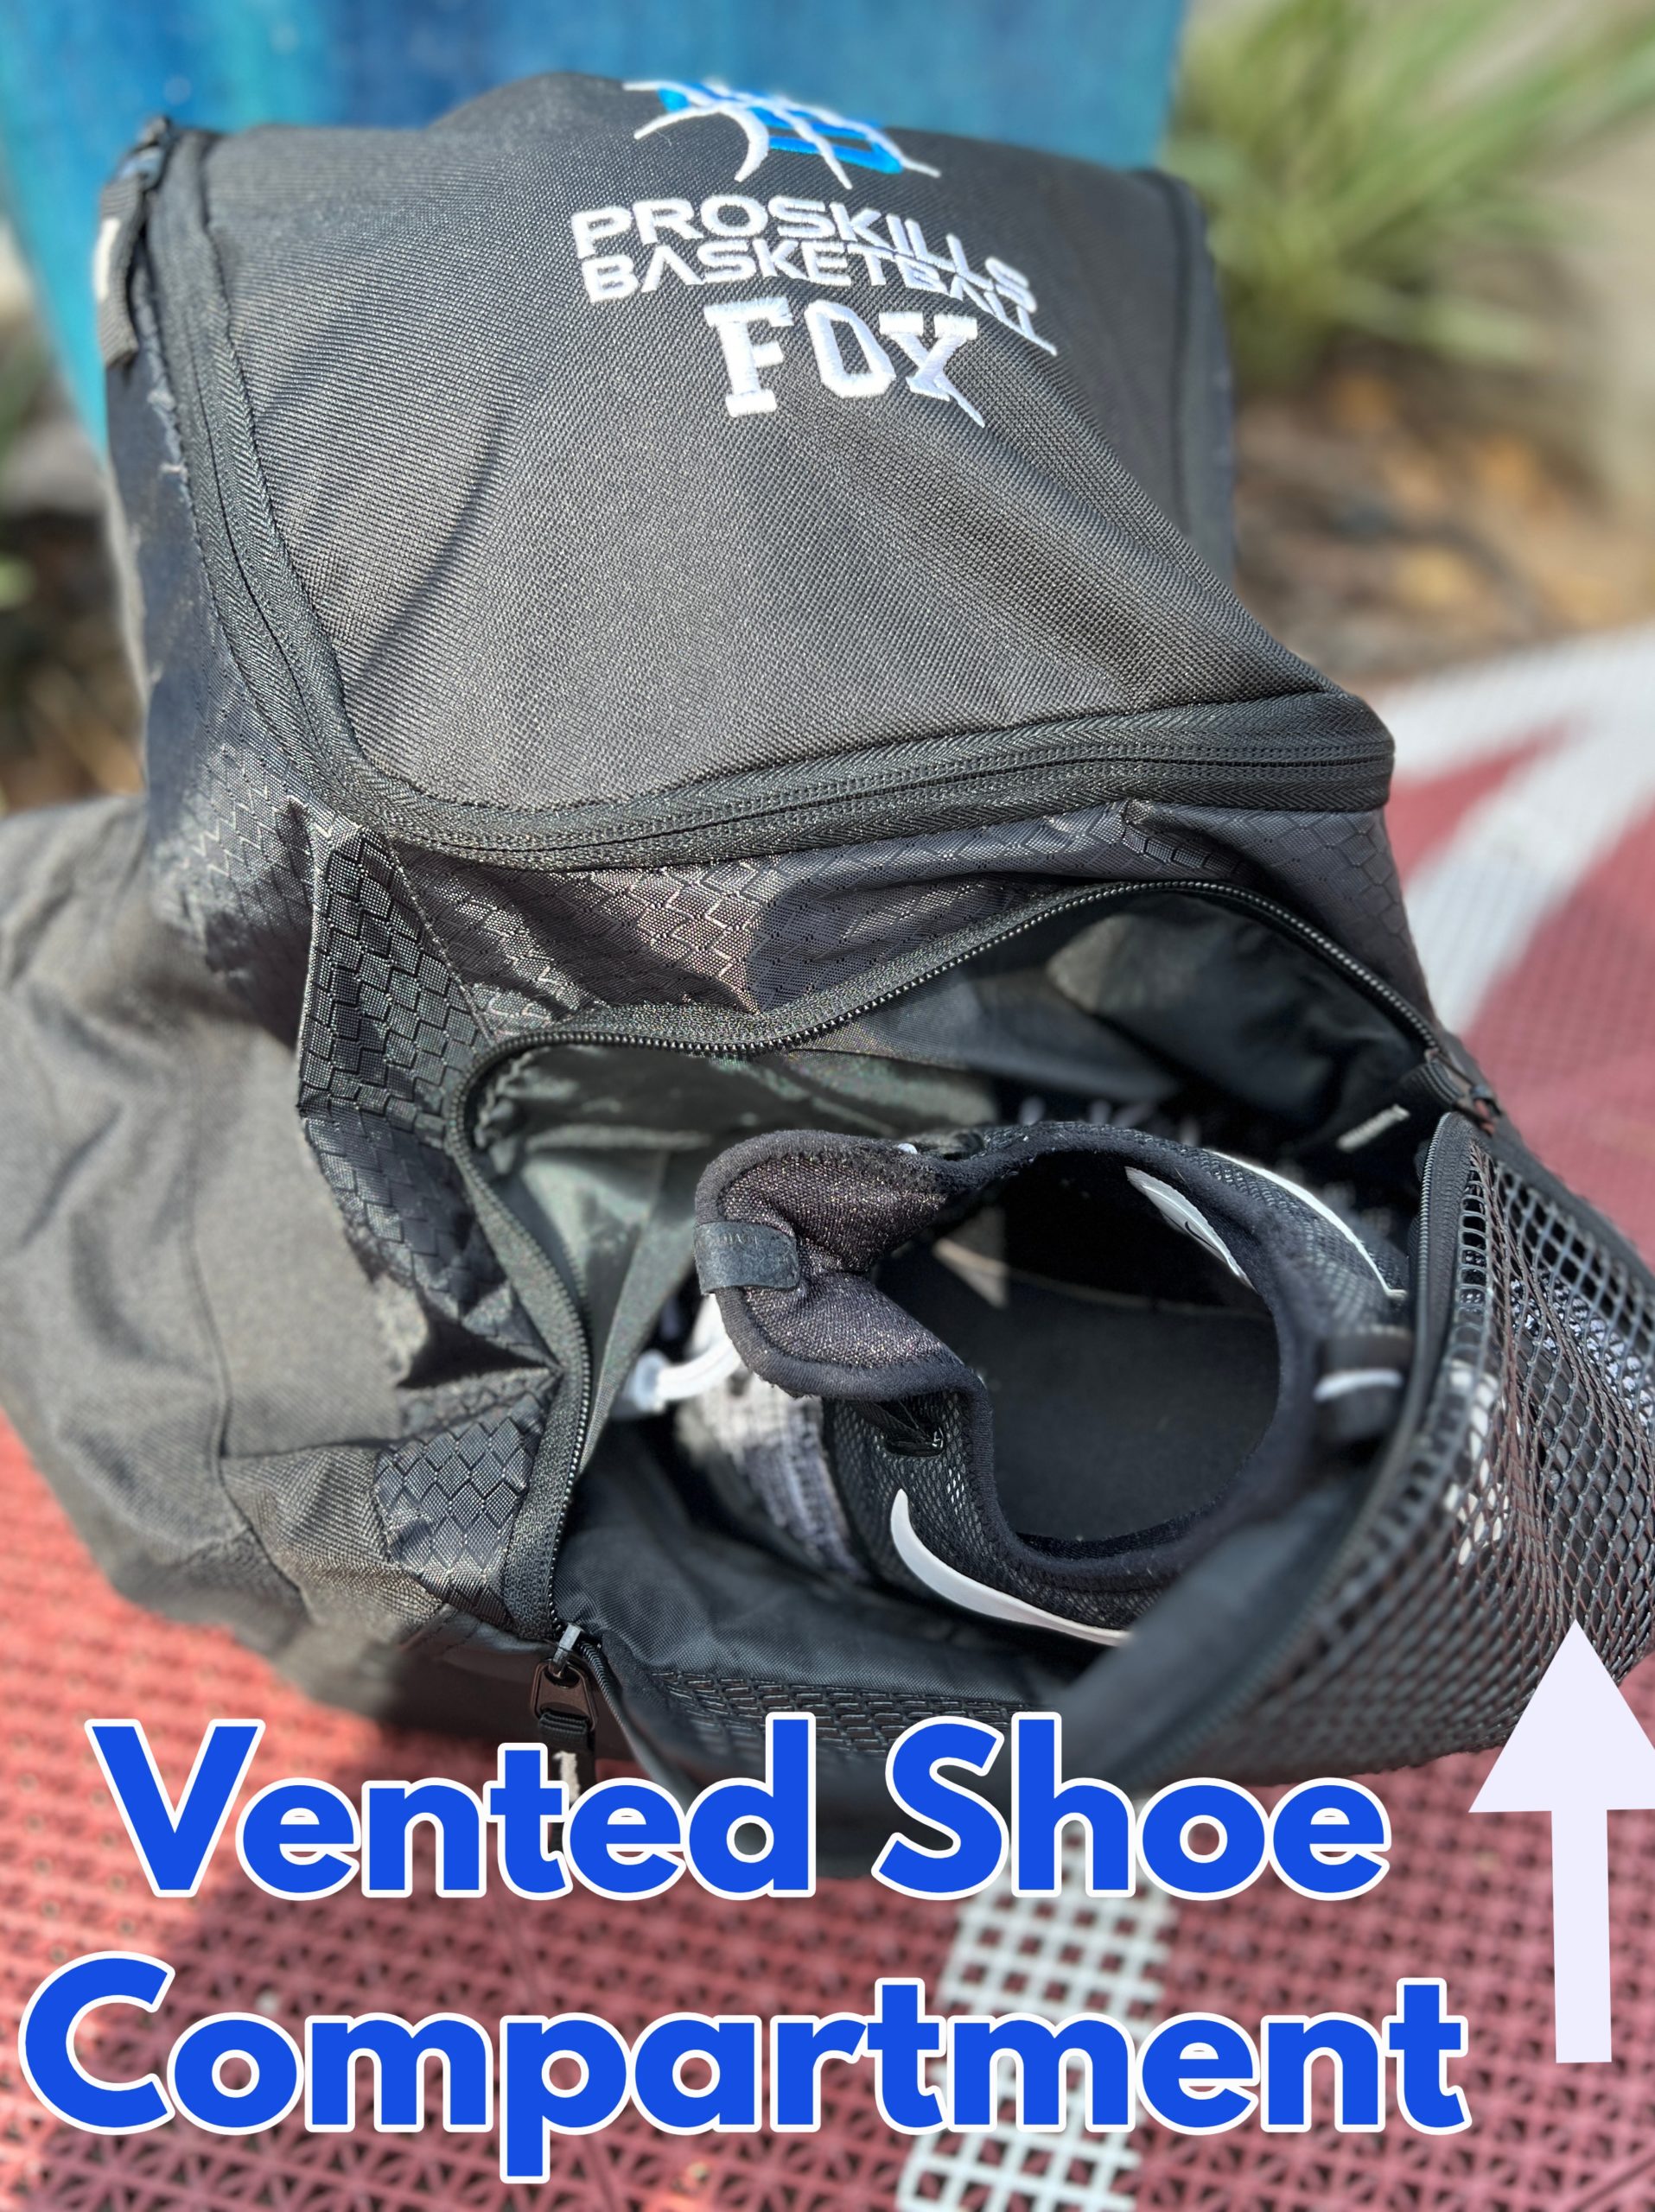 vented shoe compartment